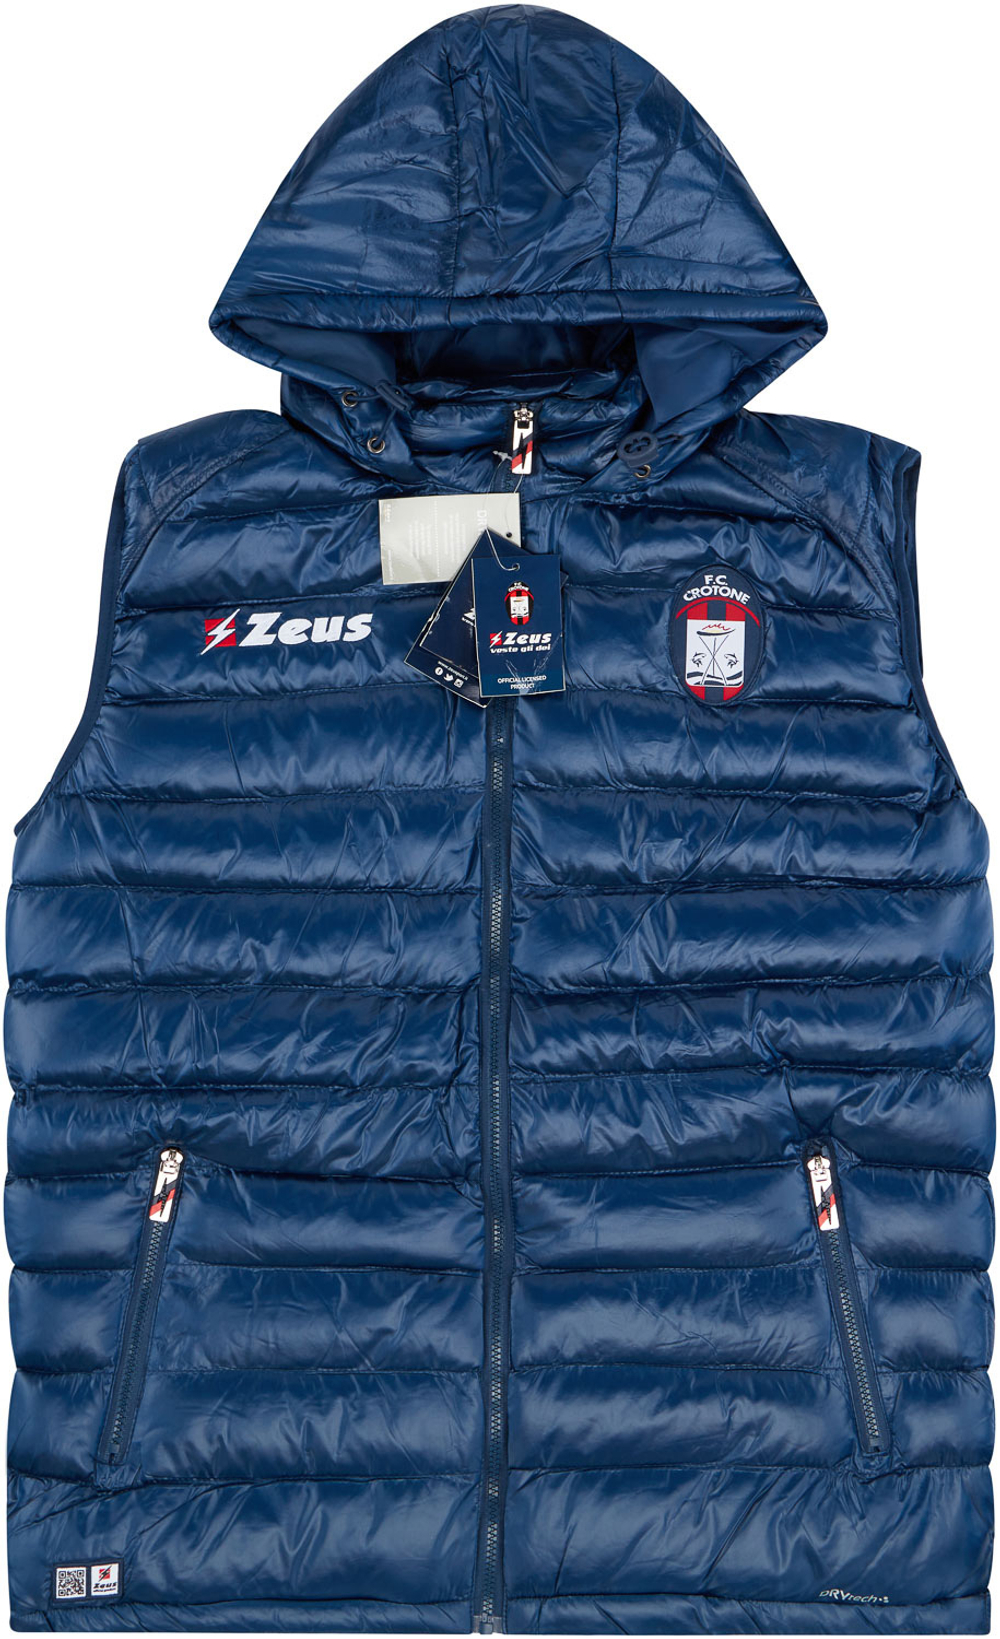 2018-19 Crotone Zeus Hooded Padded Gilet *BNIB*- Other Italian Clubs Jackets & Tracksuits Other Serie B Clubs Training